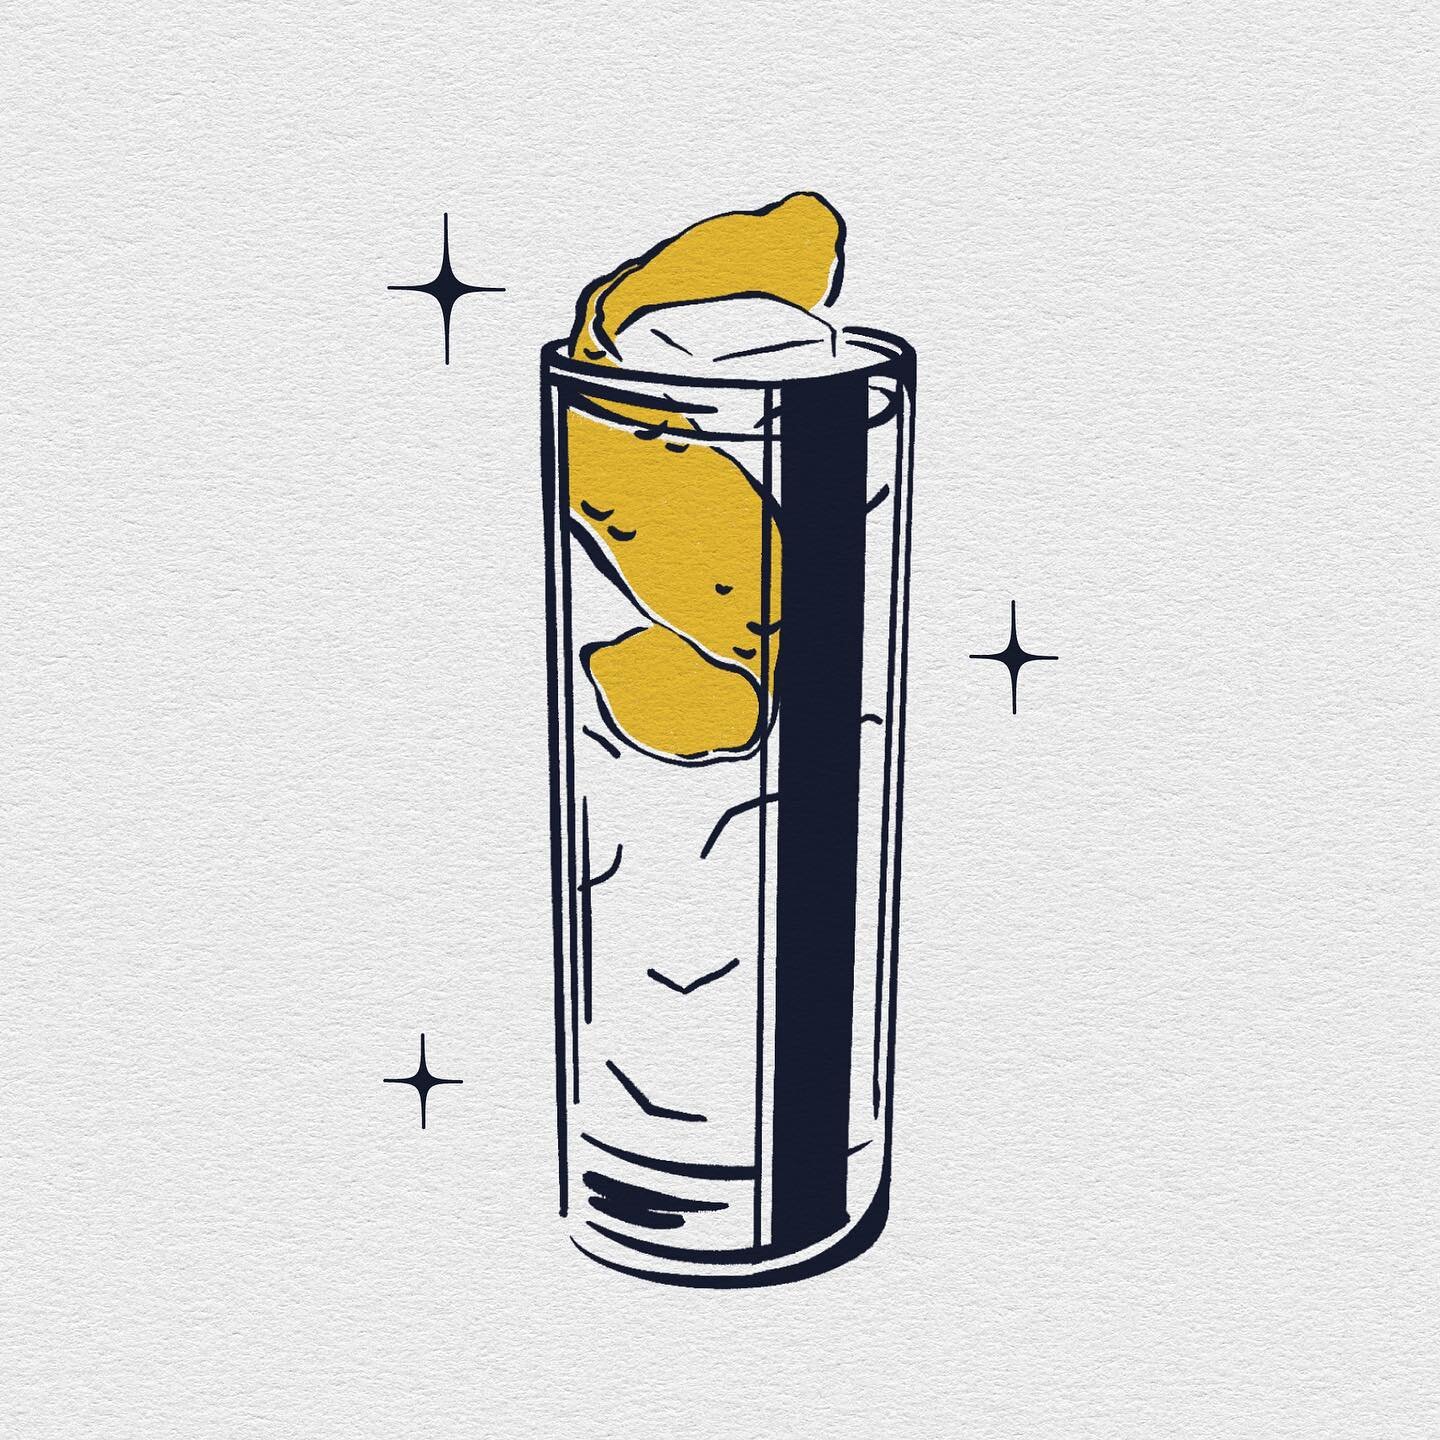 Dat lemon peel tho&hellip; another day another cocktail illo for @hausalpenz 💫

#illustration #digitalart #digitalillustration #cocktailillustration #cocktailart #digitaldrawing #highball #drinkillustration #cocktailrecipes #graphicdesign #illustrat